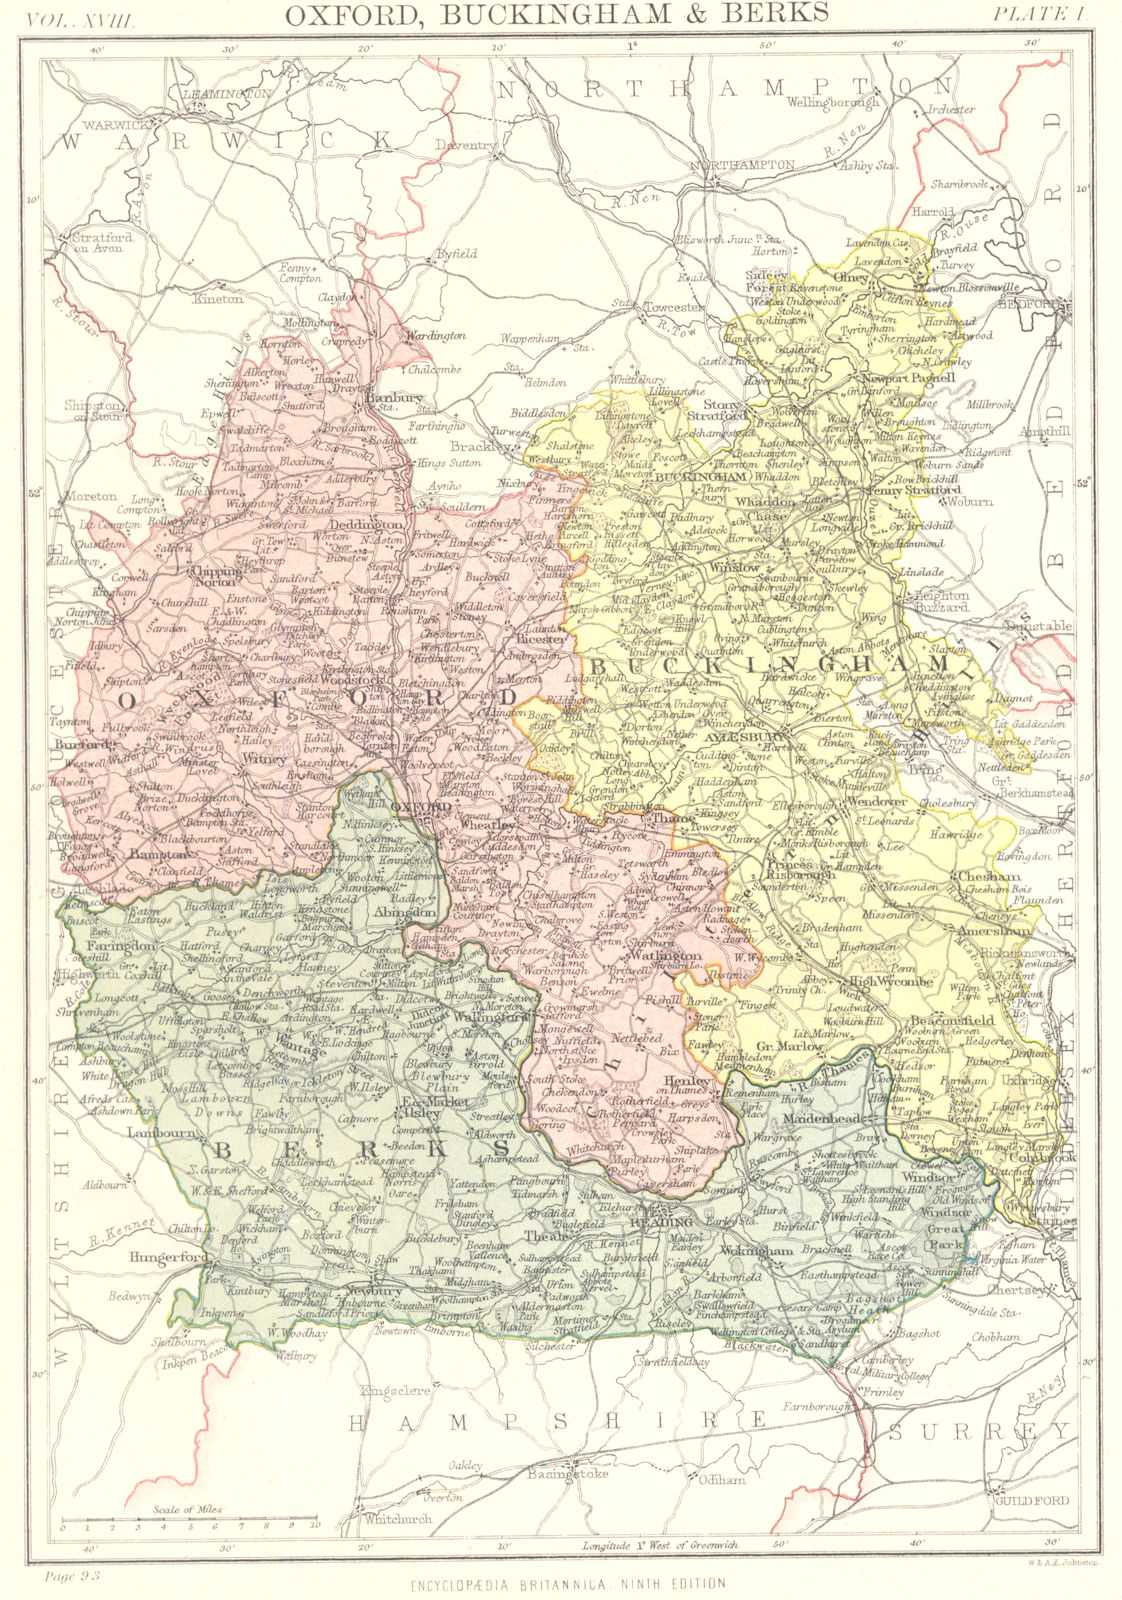 Associate Product OXFORDSHIRE BUCKINGHAMSHIRE BERKSHIRE. county map. Britannica 9th edition 1898